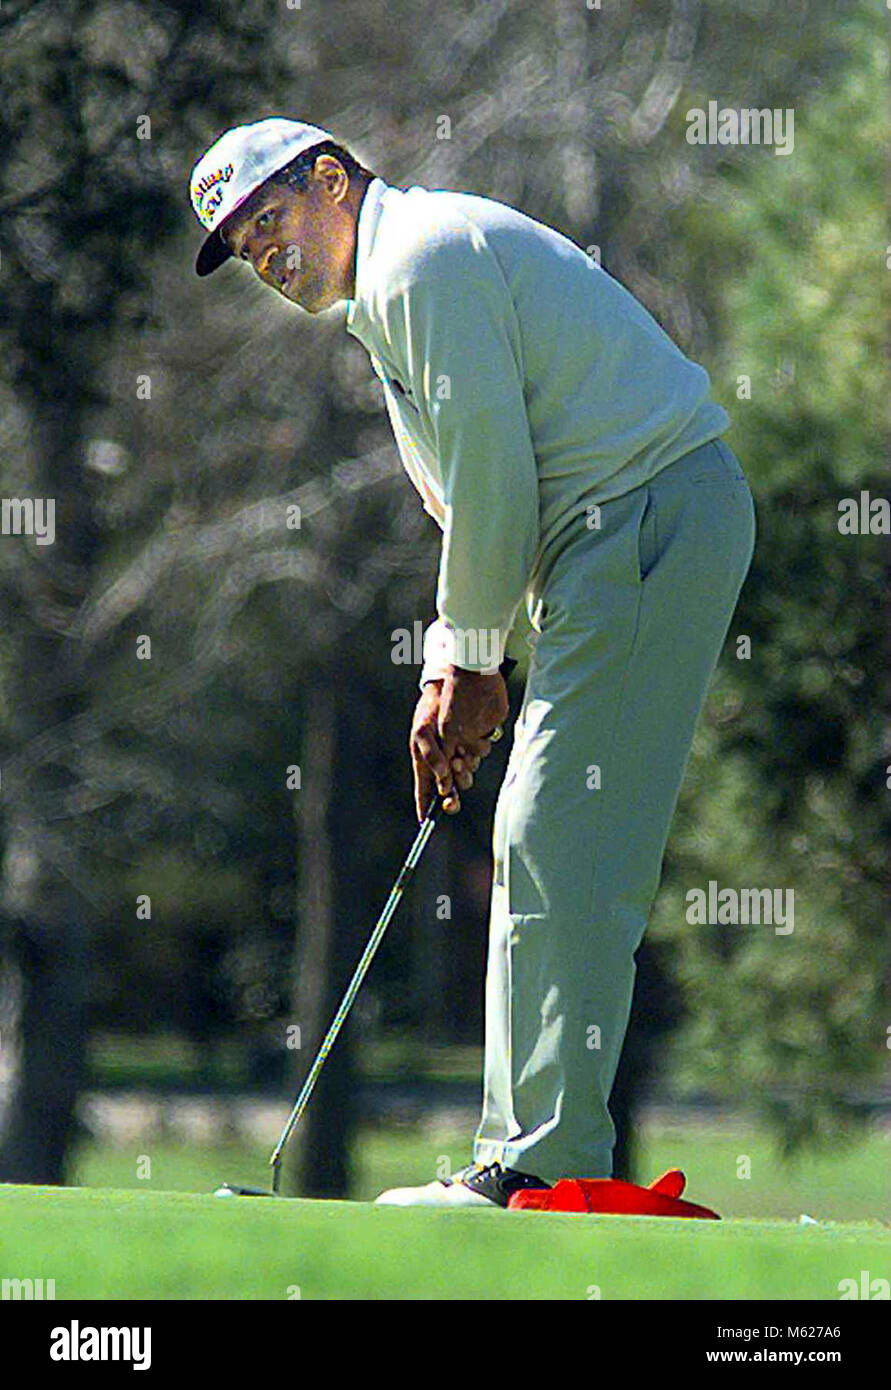 O.J. Simpson putts the ball during a round of golf at the Hansen Dam golf course in Pacoima, CA on February 5, 1997 during the civil trial for the death of Ron Goldman and his wife, Nicole Brown Simpson. Photo by Francis Specker Stock Photo